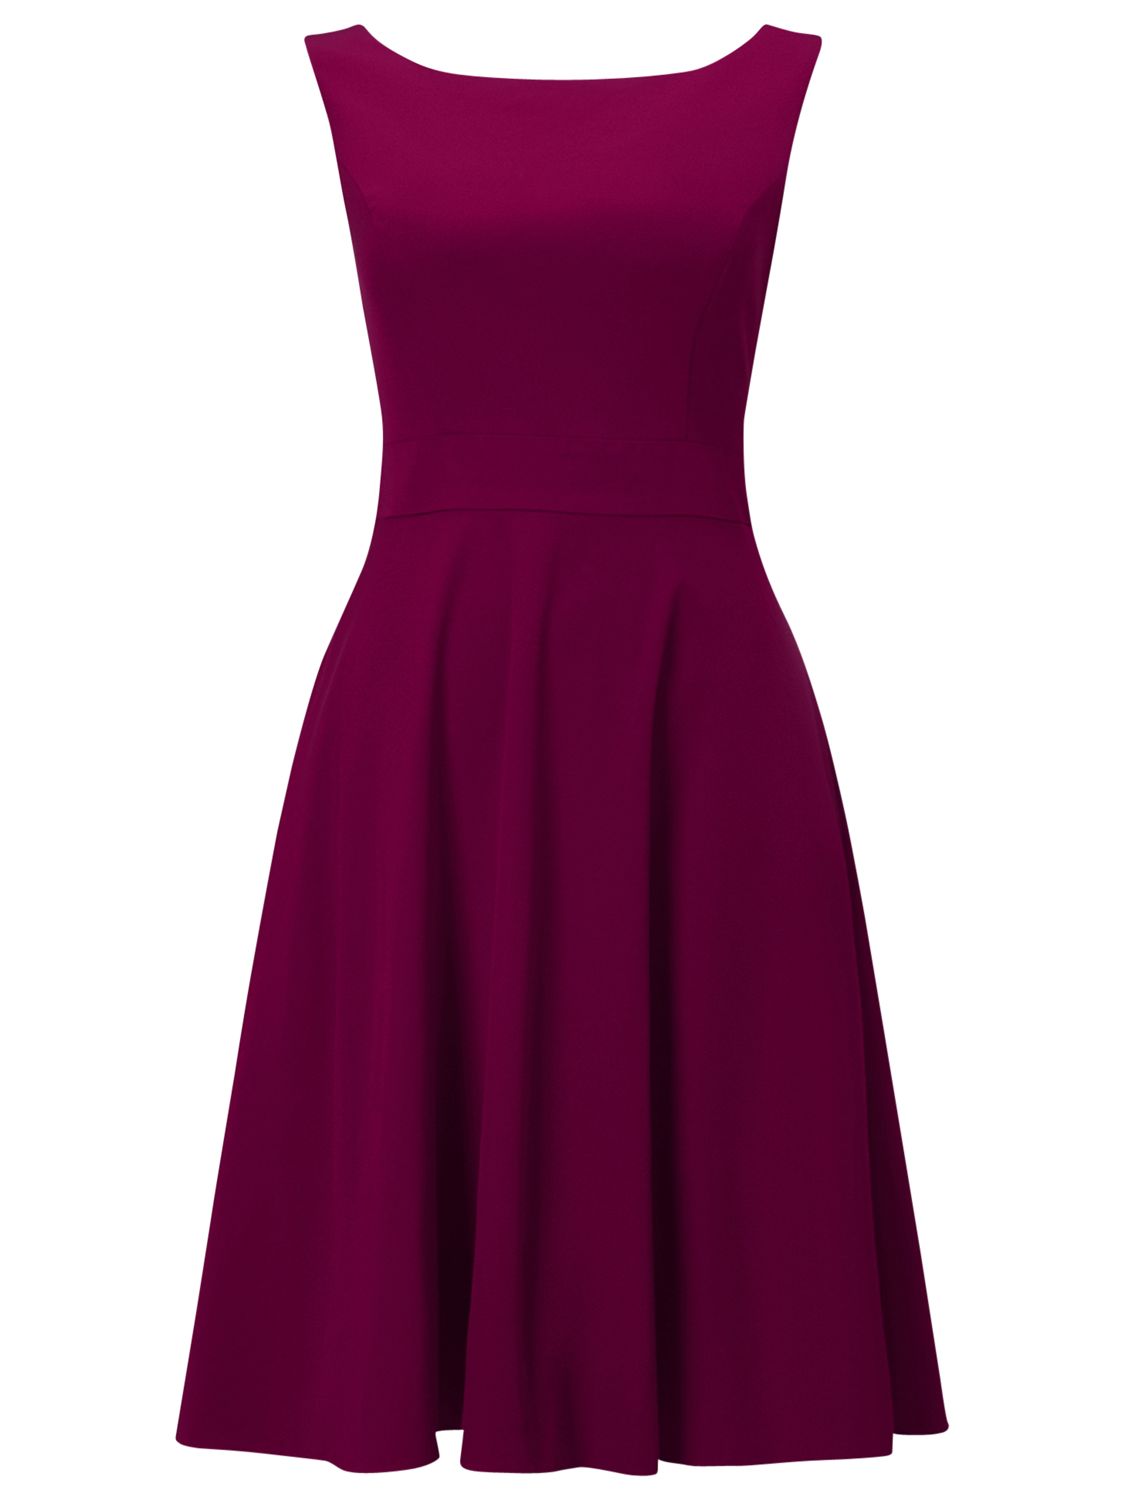 Phase Eight Pascale Grosgrain Dress, Berry at John Lewis & Partners